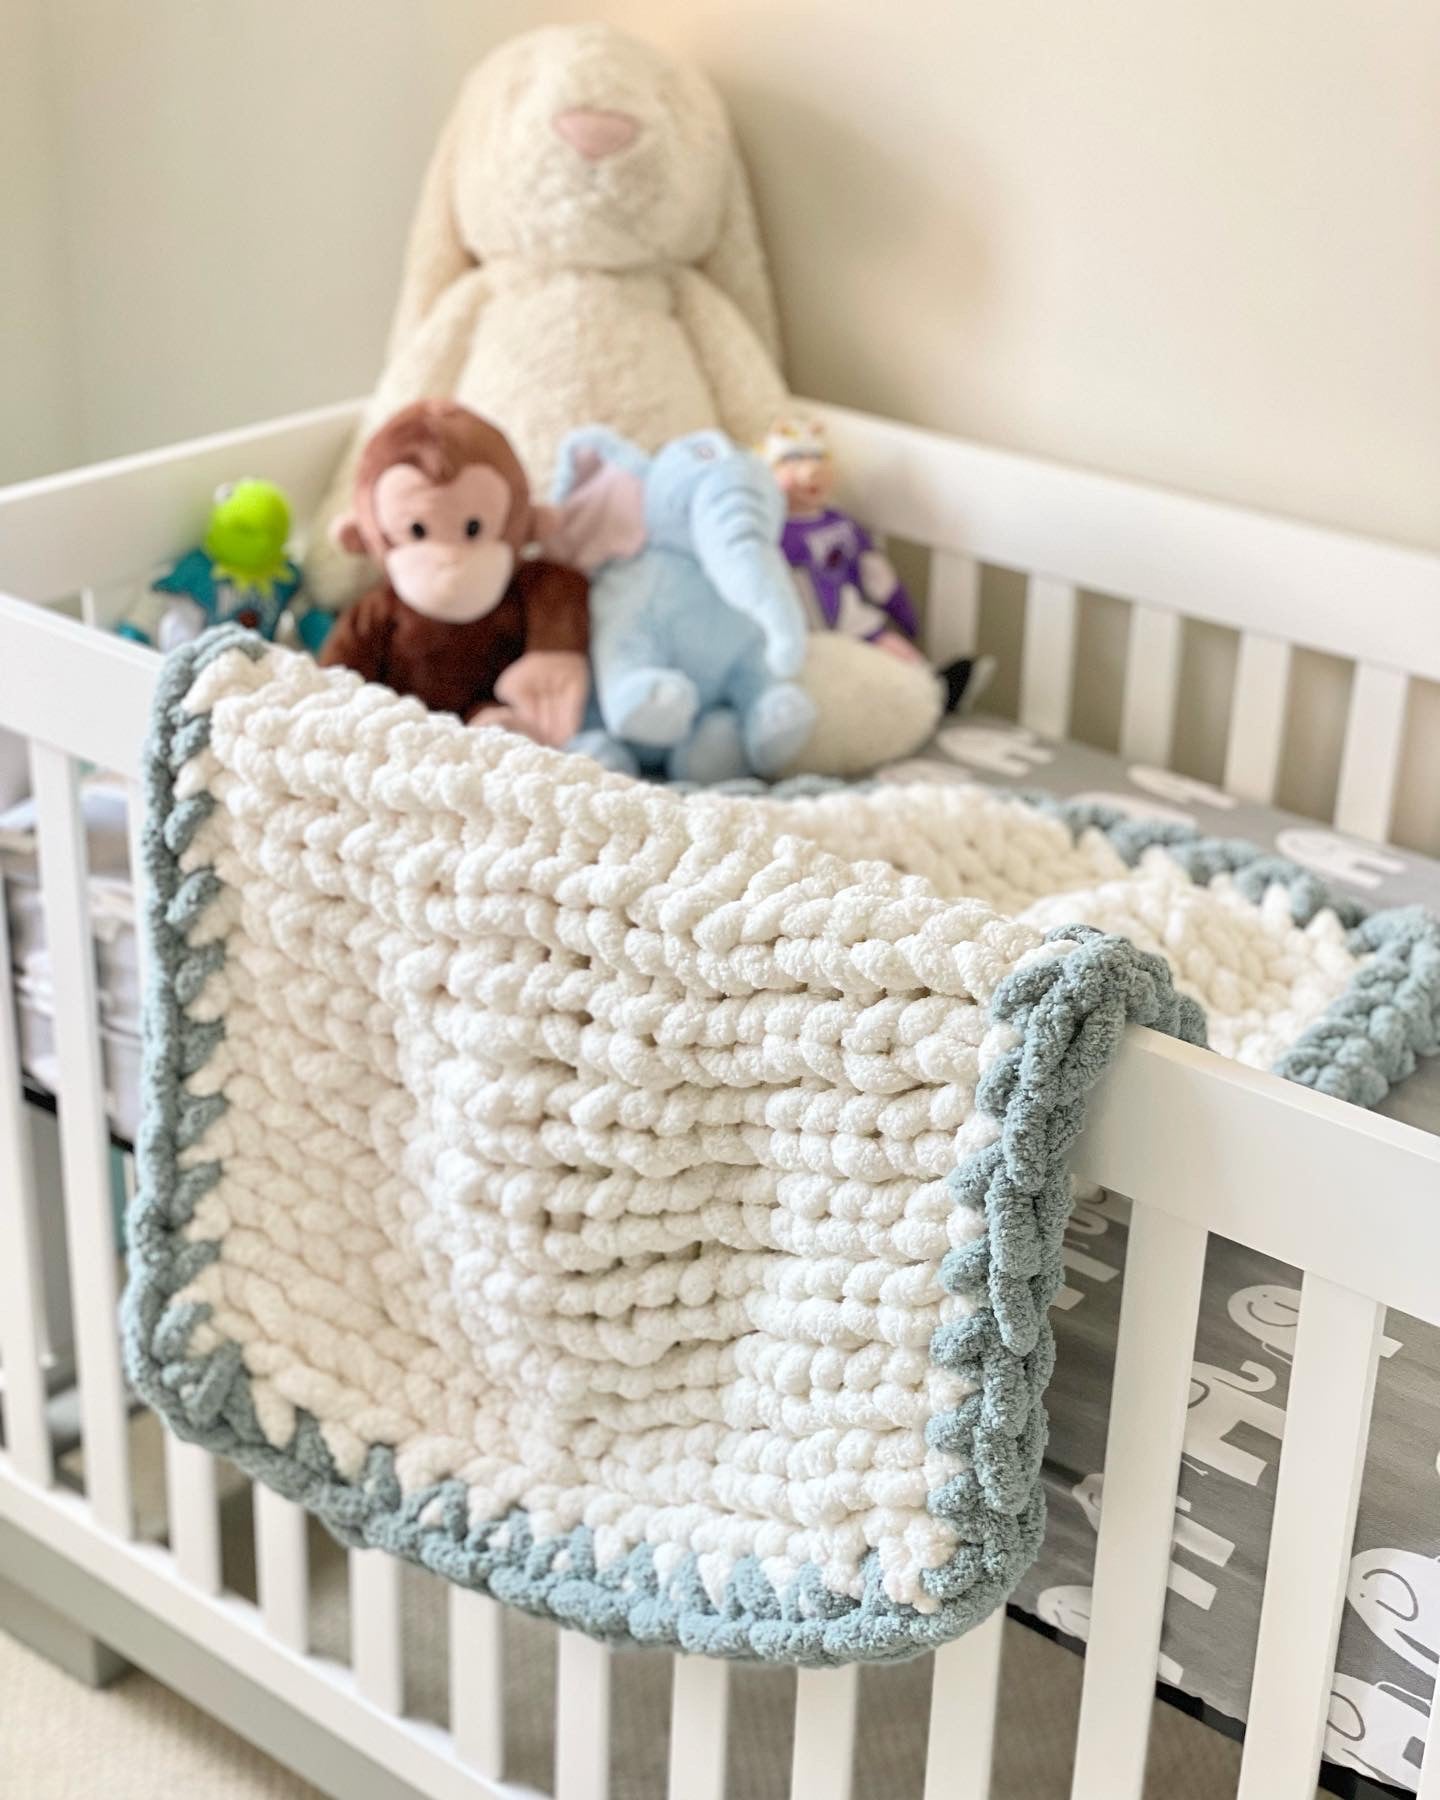 Healing Hand, Chunky Knit Baby Blankets - White with Mint Green Edge